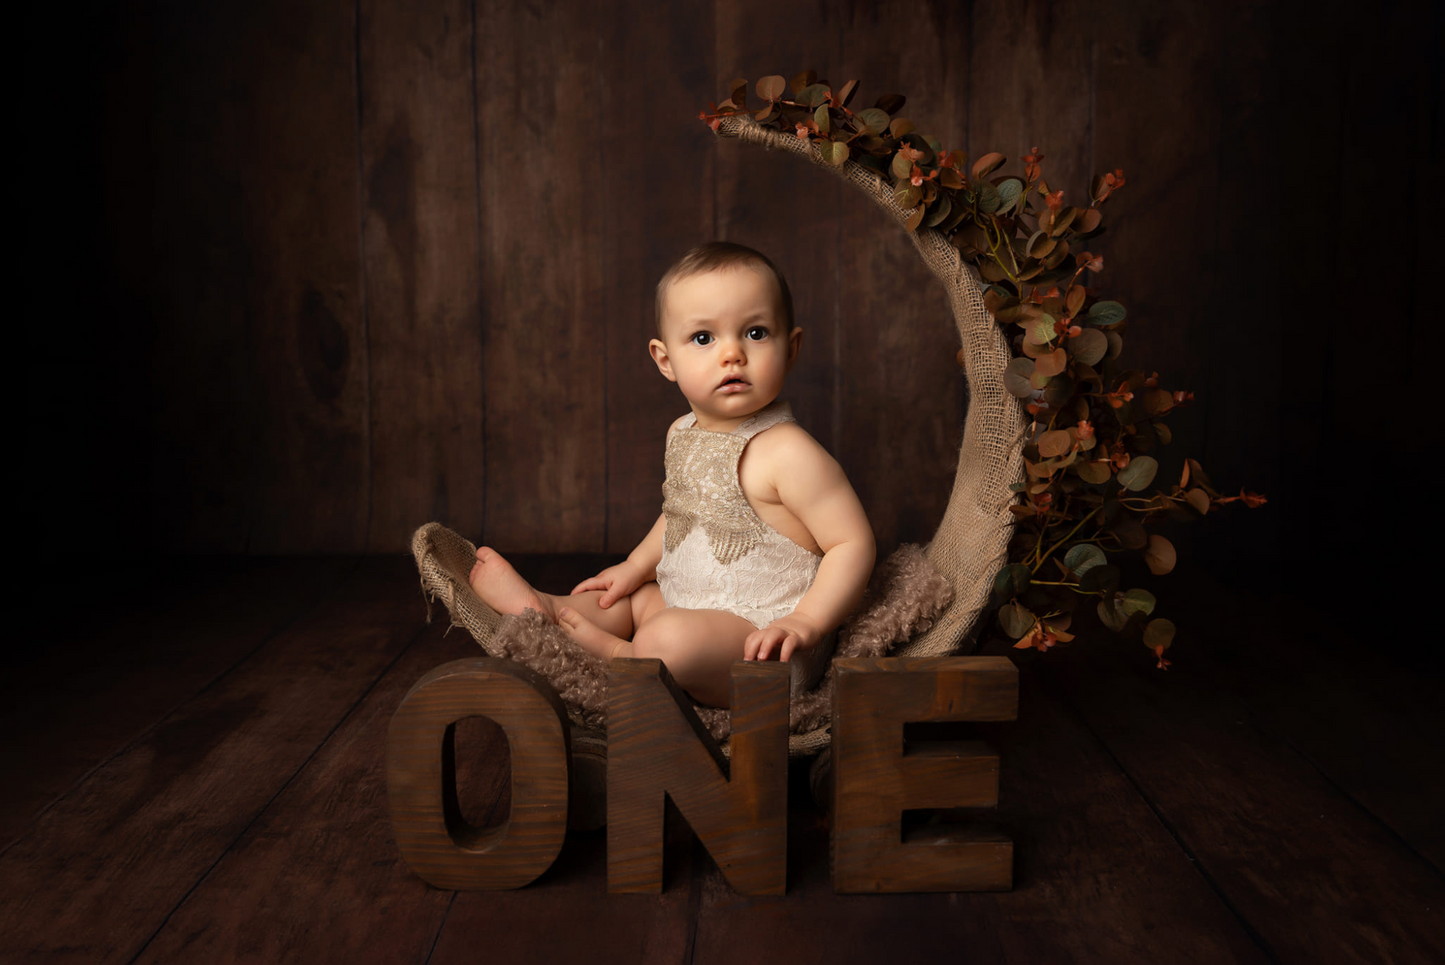 A baby sits in a rustic moon-shaped swing adorned with autumn leaves, with large wooden letters spelling "ONE" in front. The scene uses a newborn photography prop to create a warm, earthy atmosphere.